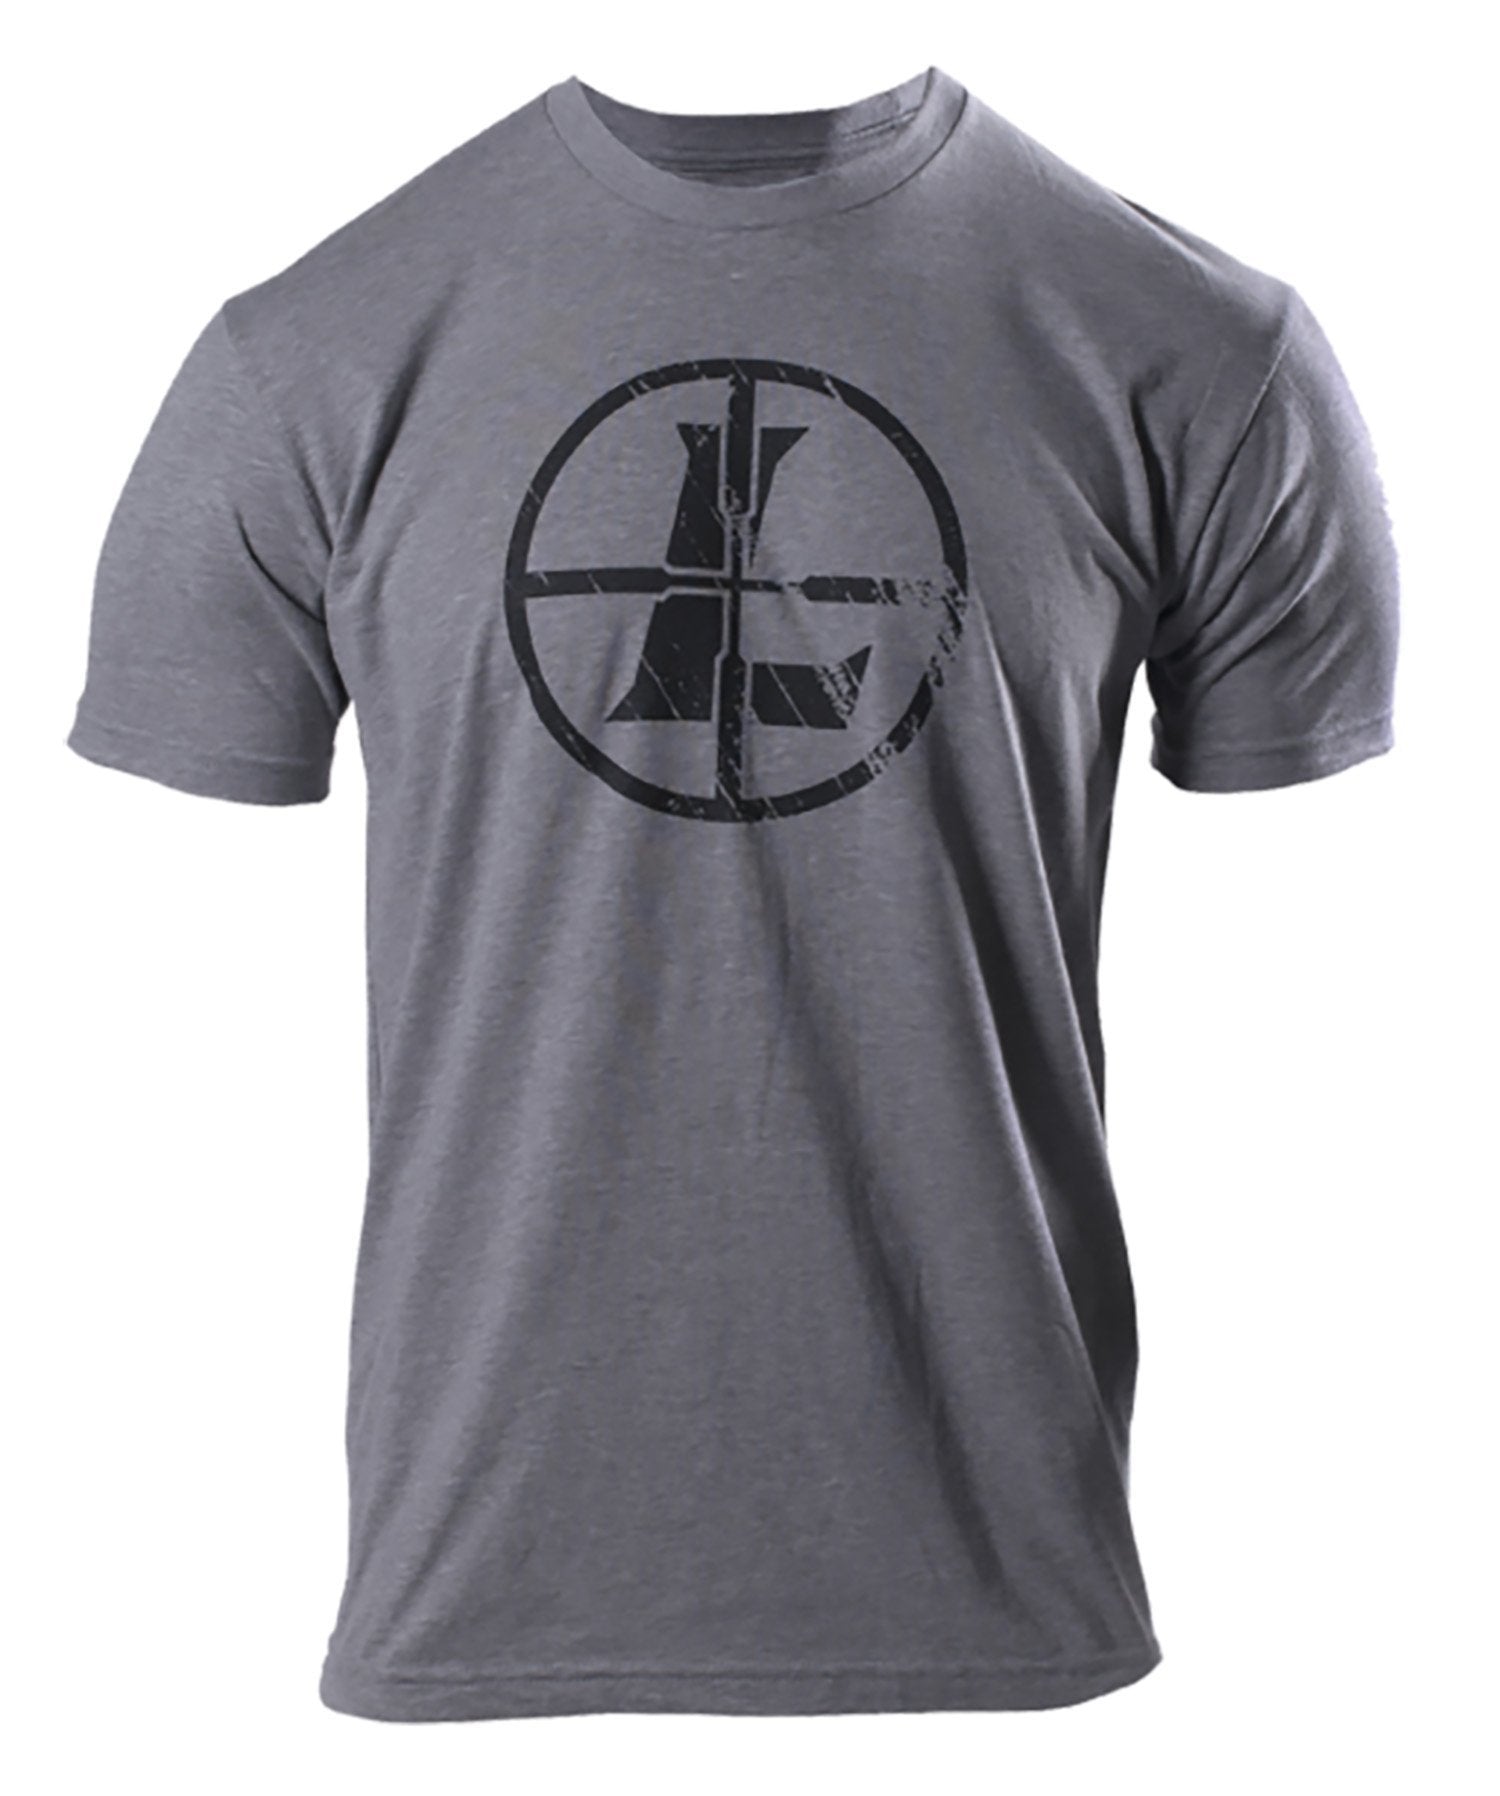 Leupold Distressed Reticle T-Shirt Graphite Heather Large Short Sleeve - Pacific Flyway Supplies